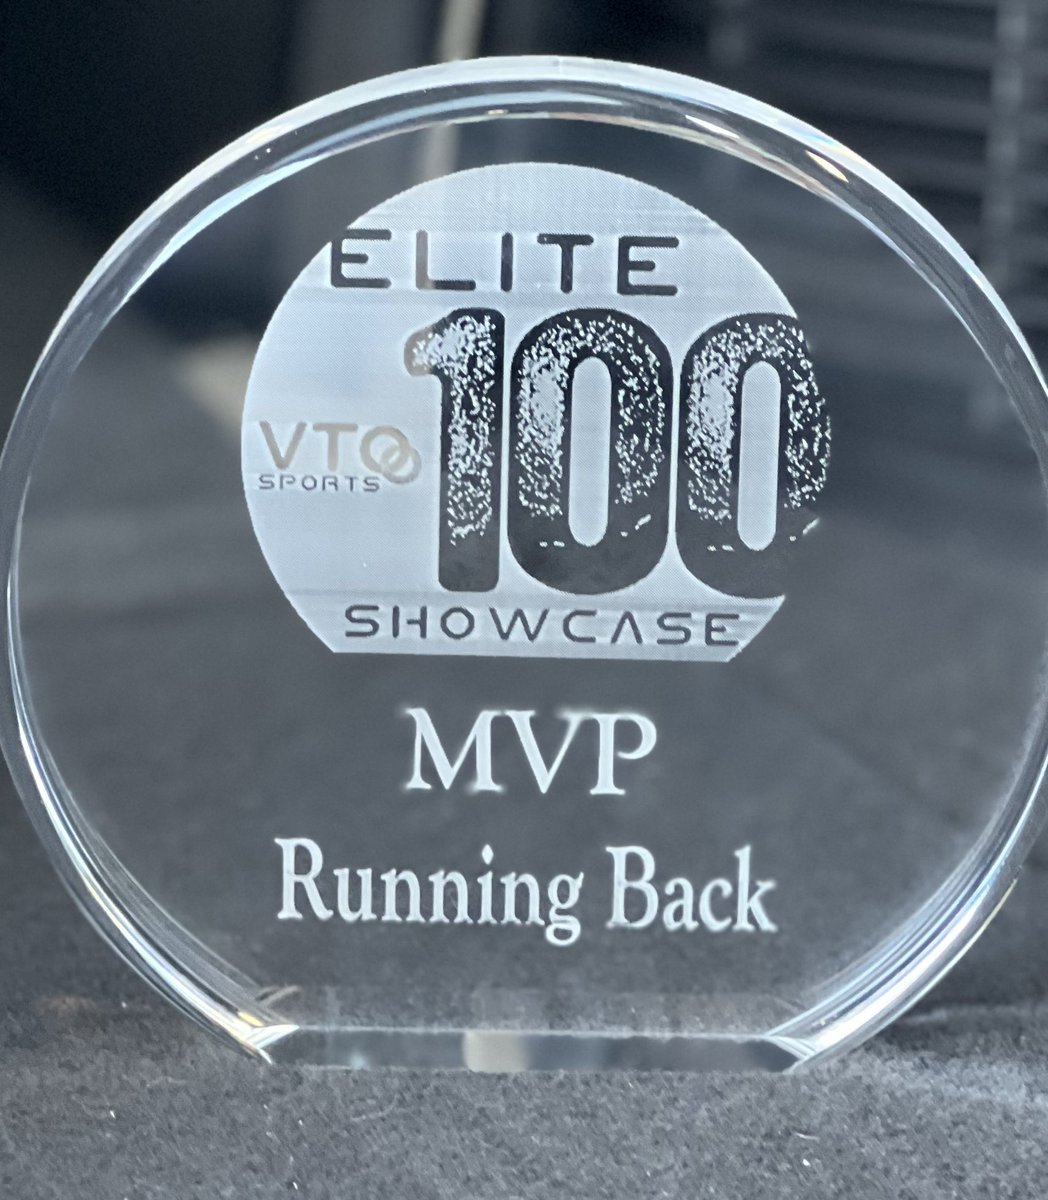 Had an amazing time at @VTOSPORTS Elite 100 today. Grateful for the recognition and looking forward to the All American in NC and to perform at @TheSHOWByNXGN this summer in Atlanta. Thank you to the coaches today! @jhadnottnxgn @VinceJacobs8